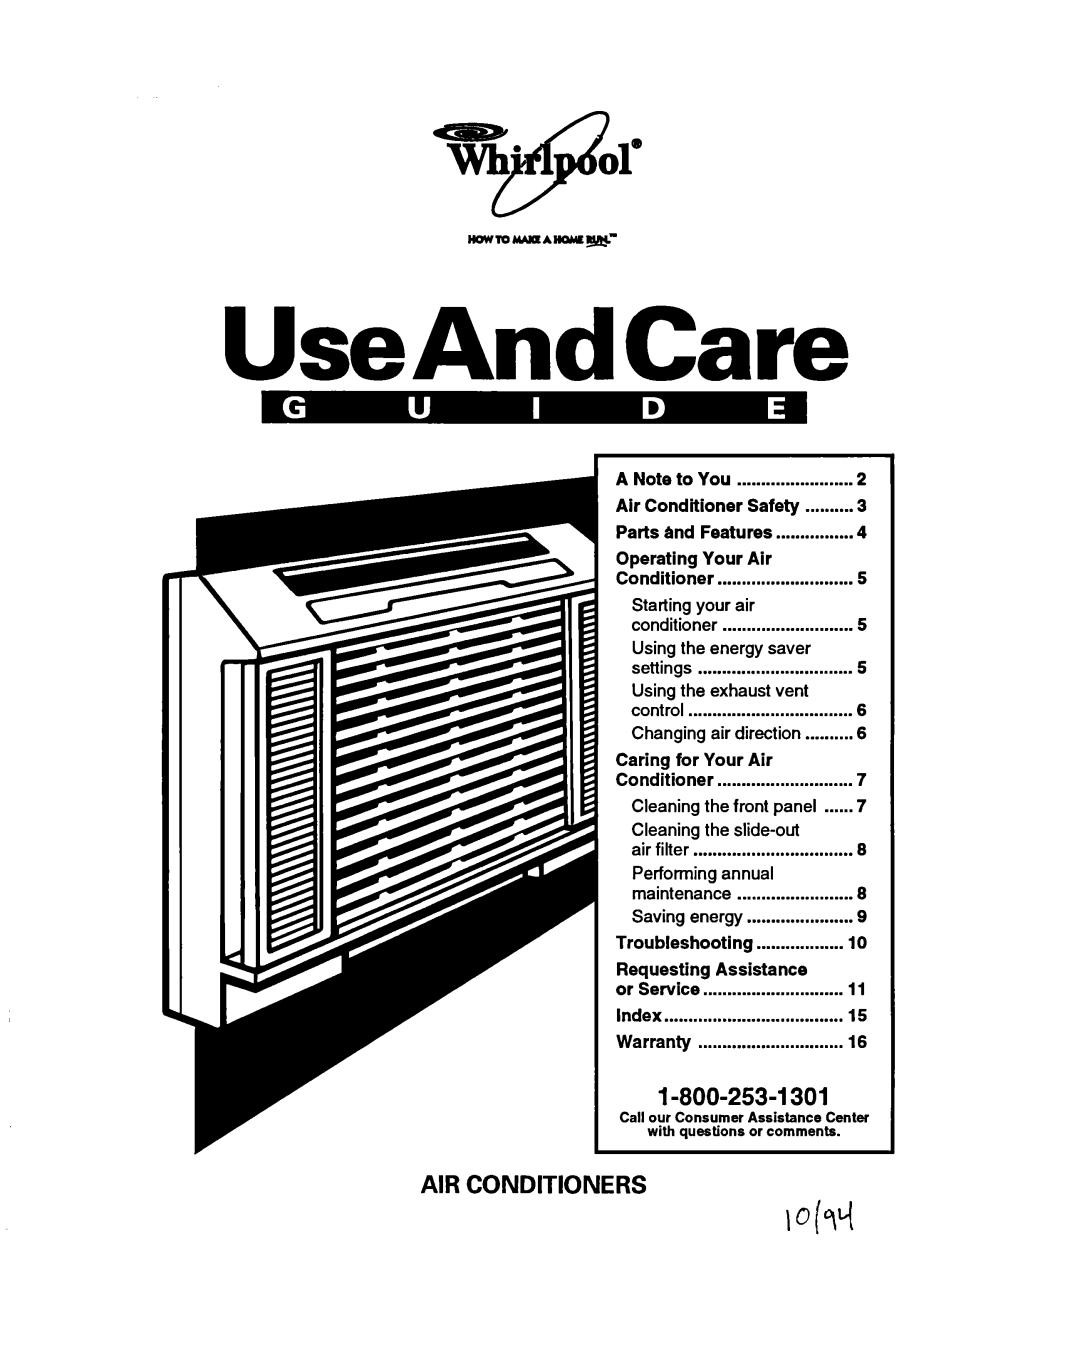 Whirlpool ACH082XD0 warranty AIR CONDITIONERS lqvl, UseAndCare 